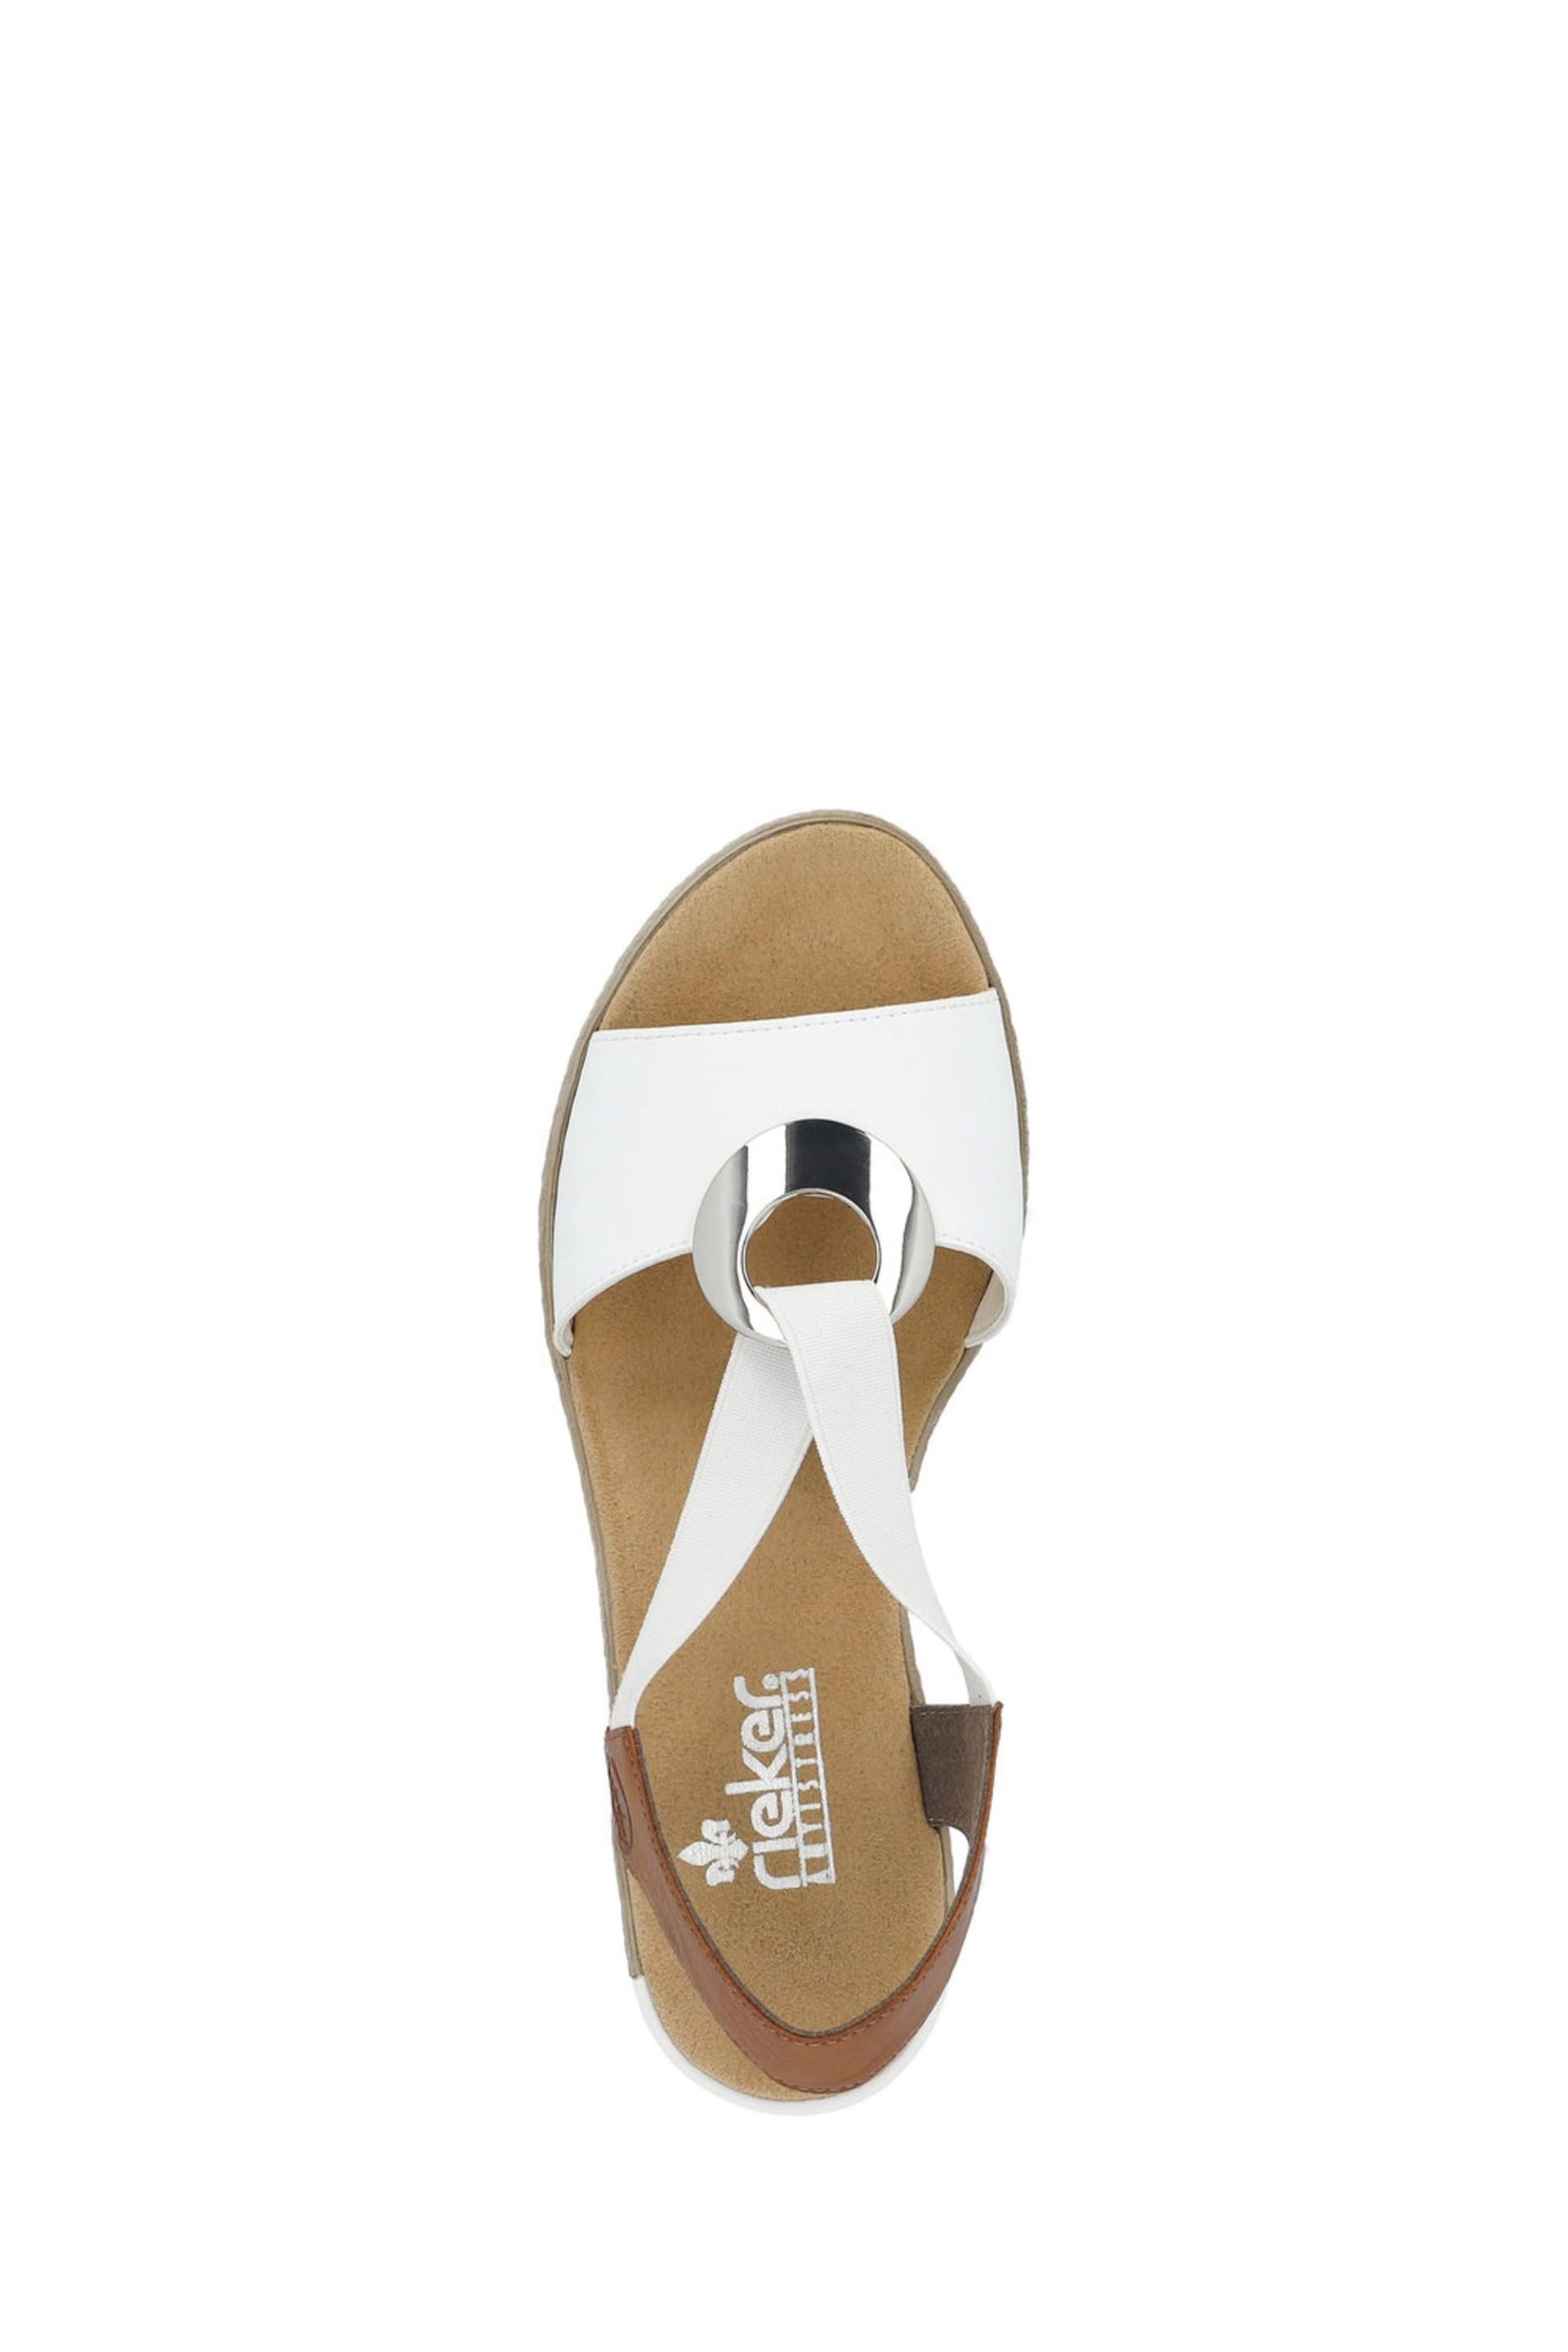 Rieker Womens Elastic Stretch Sandals - Image 8 of 10